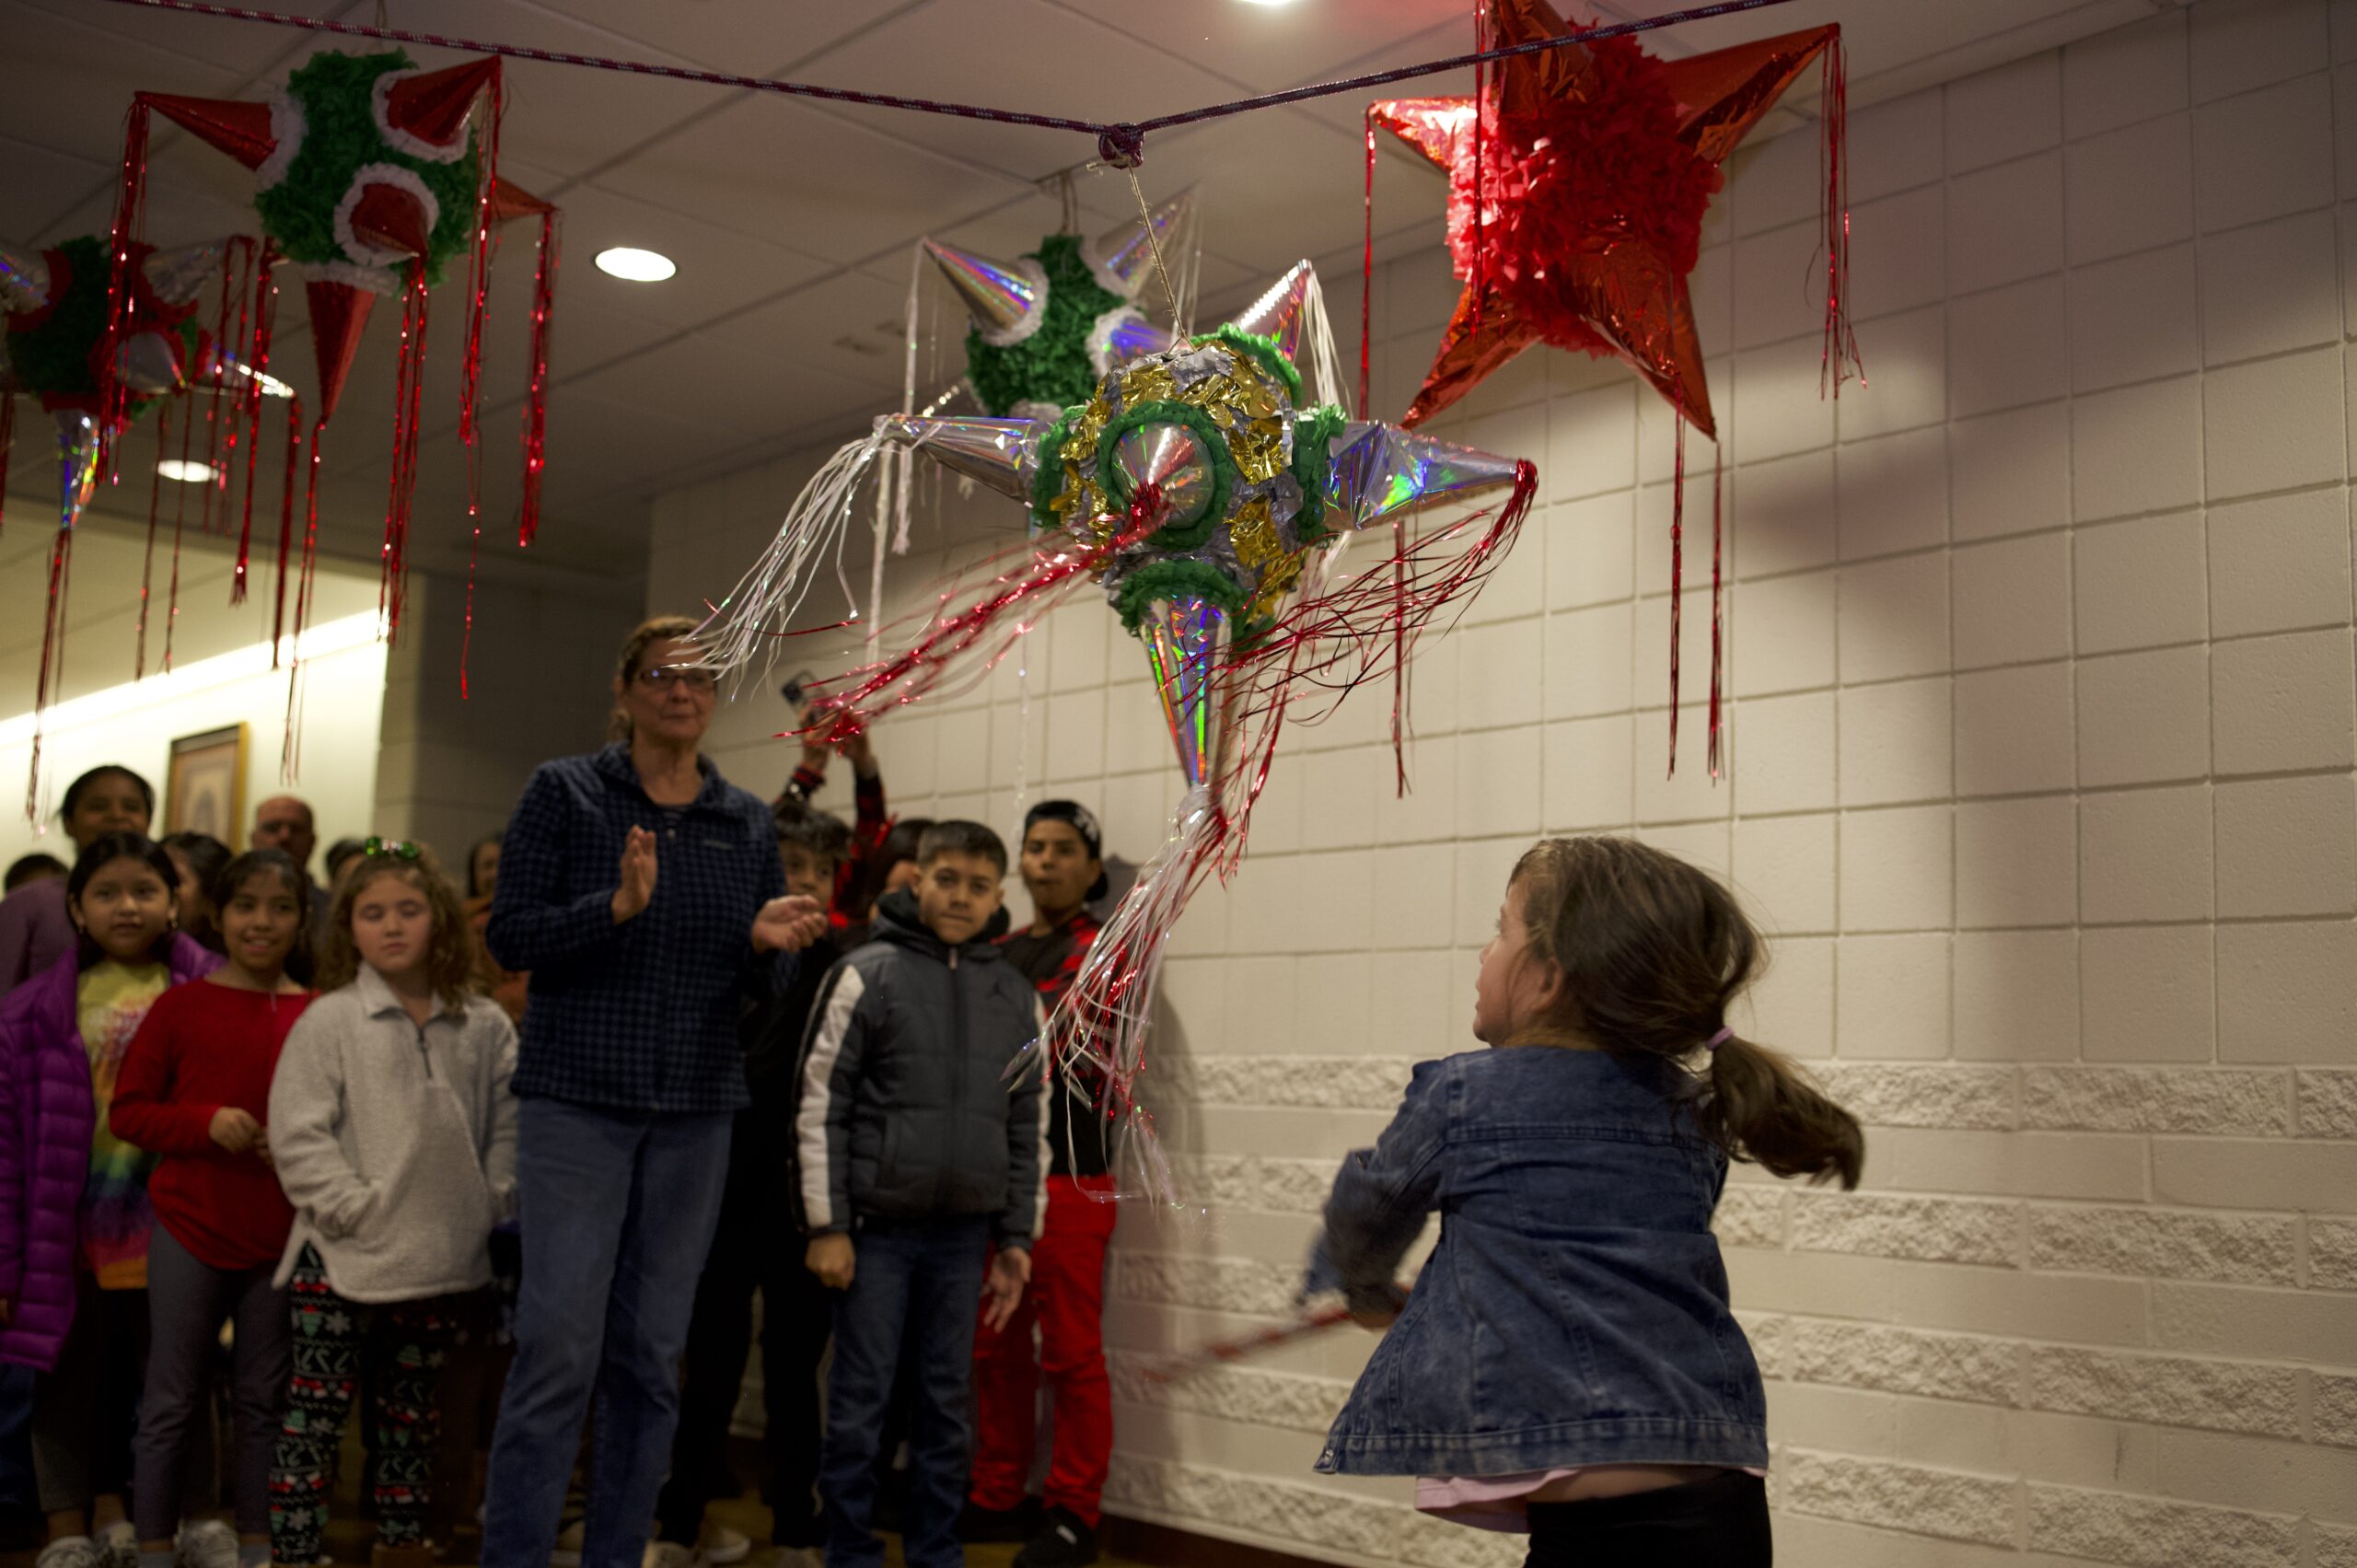 Young girl hits a piñata in front of a crowd at Las Posadas celebration